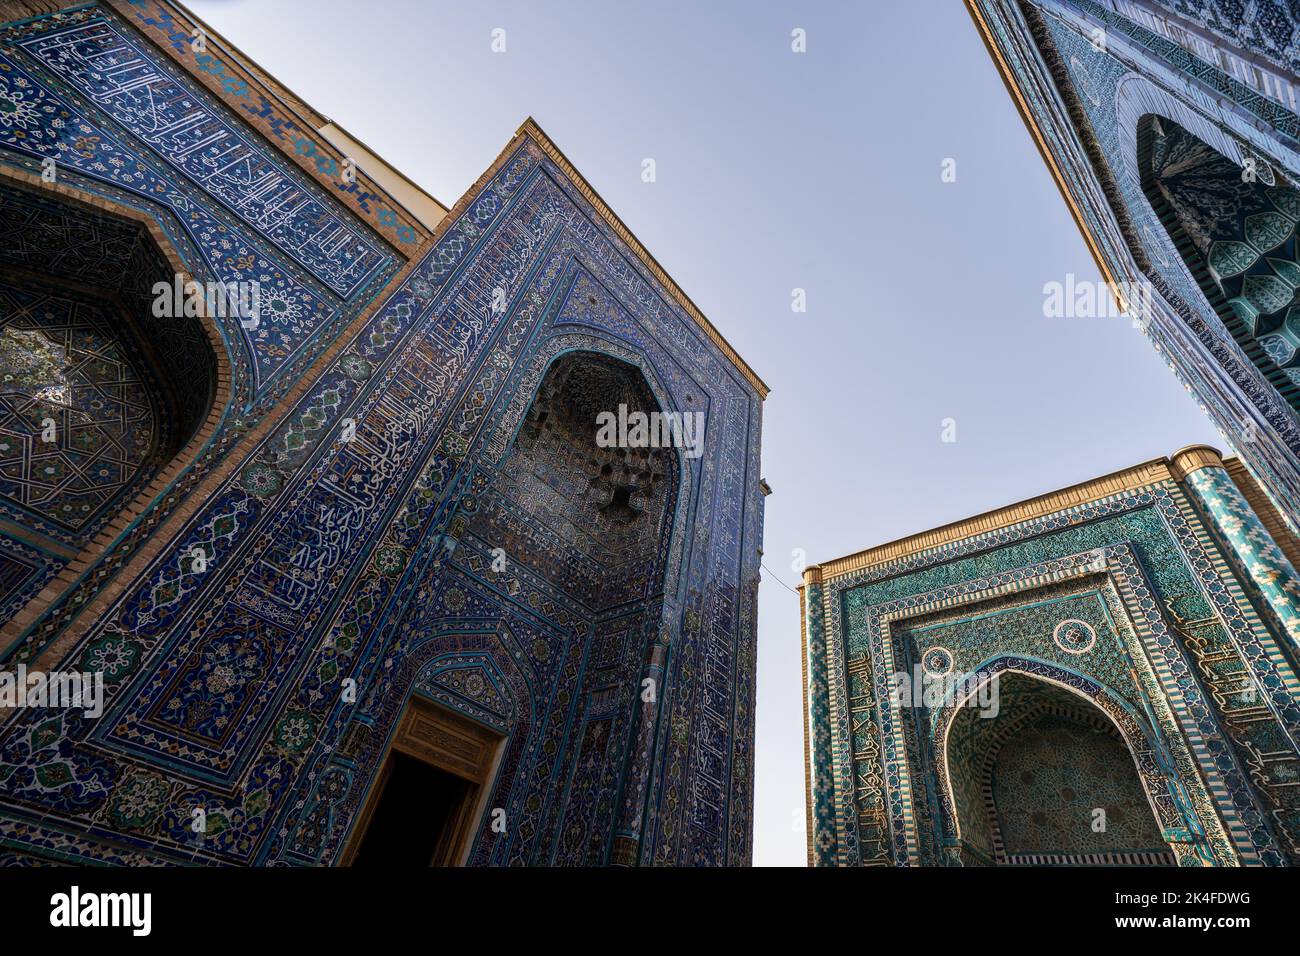 Looking up at the blue tiled facades and arches of the Shah-i-Zinda mausoleum complex at sunset, Samarkand Stock Photo